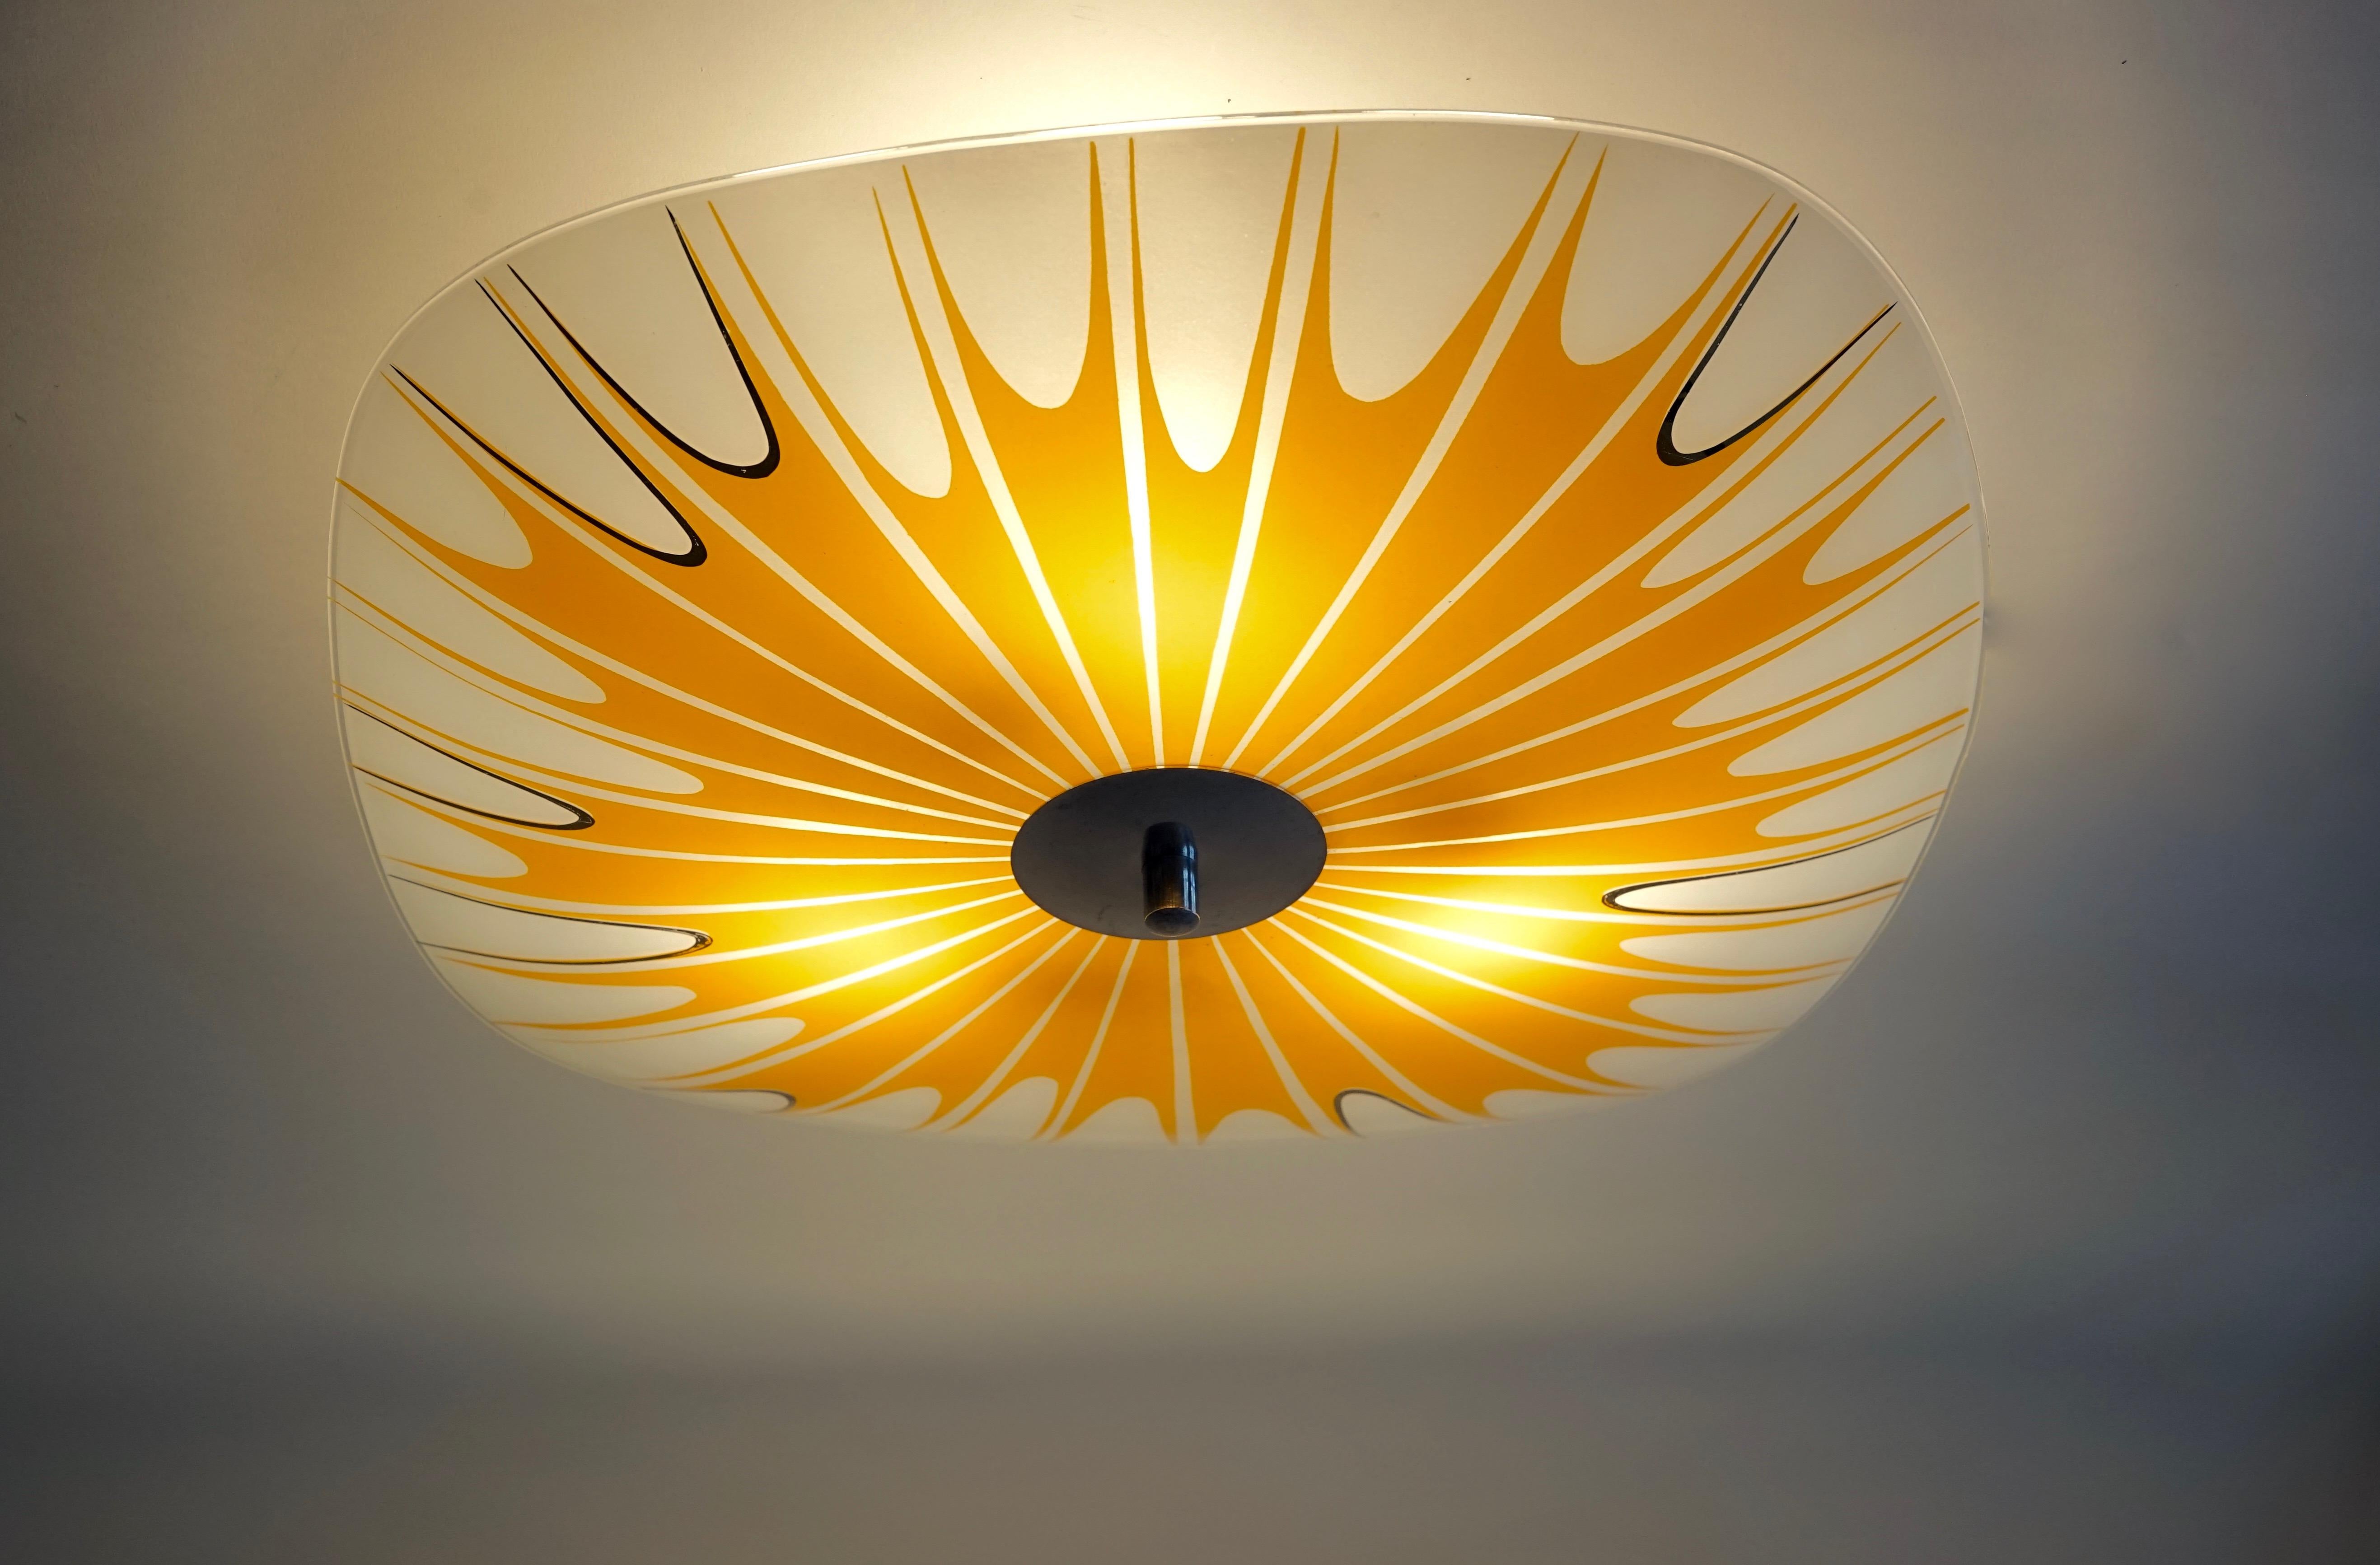 Czech Brussels Styled Ceiling Lamps, 1950s-1960s from Napako For Sale